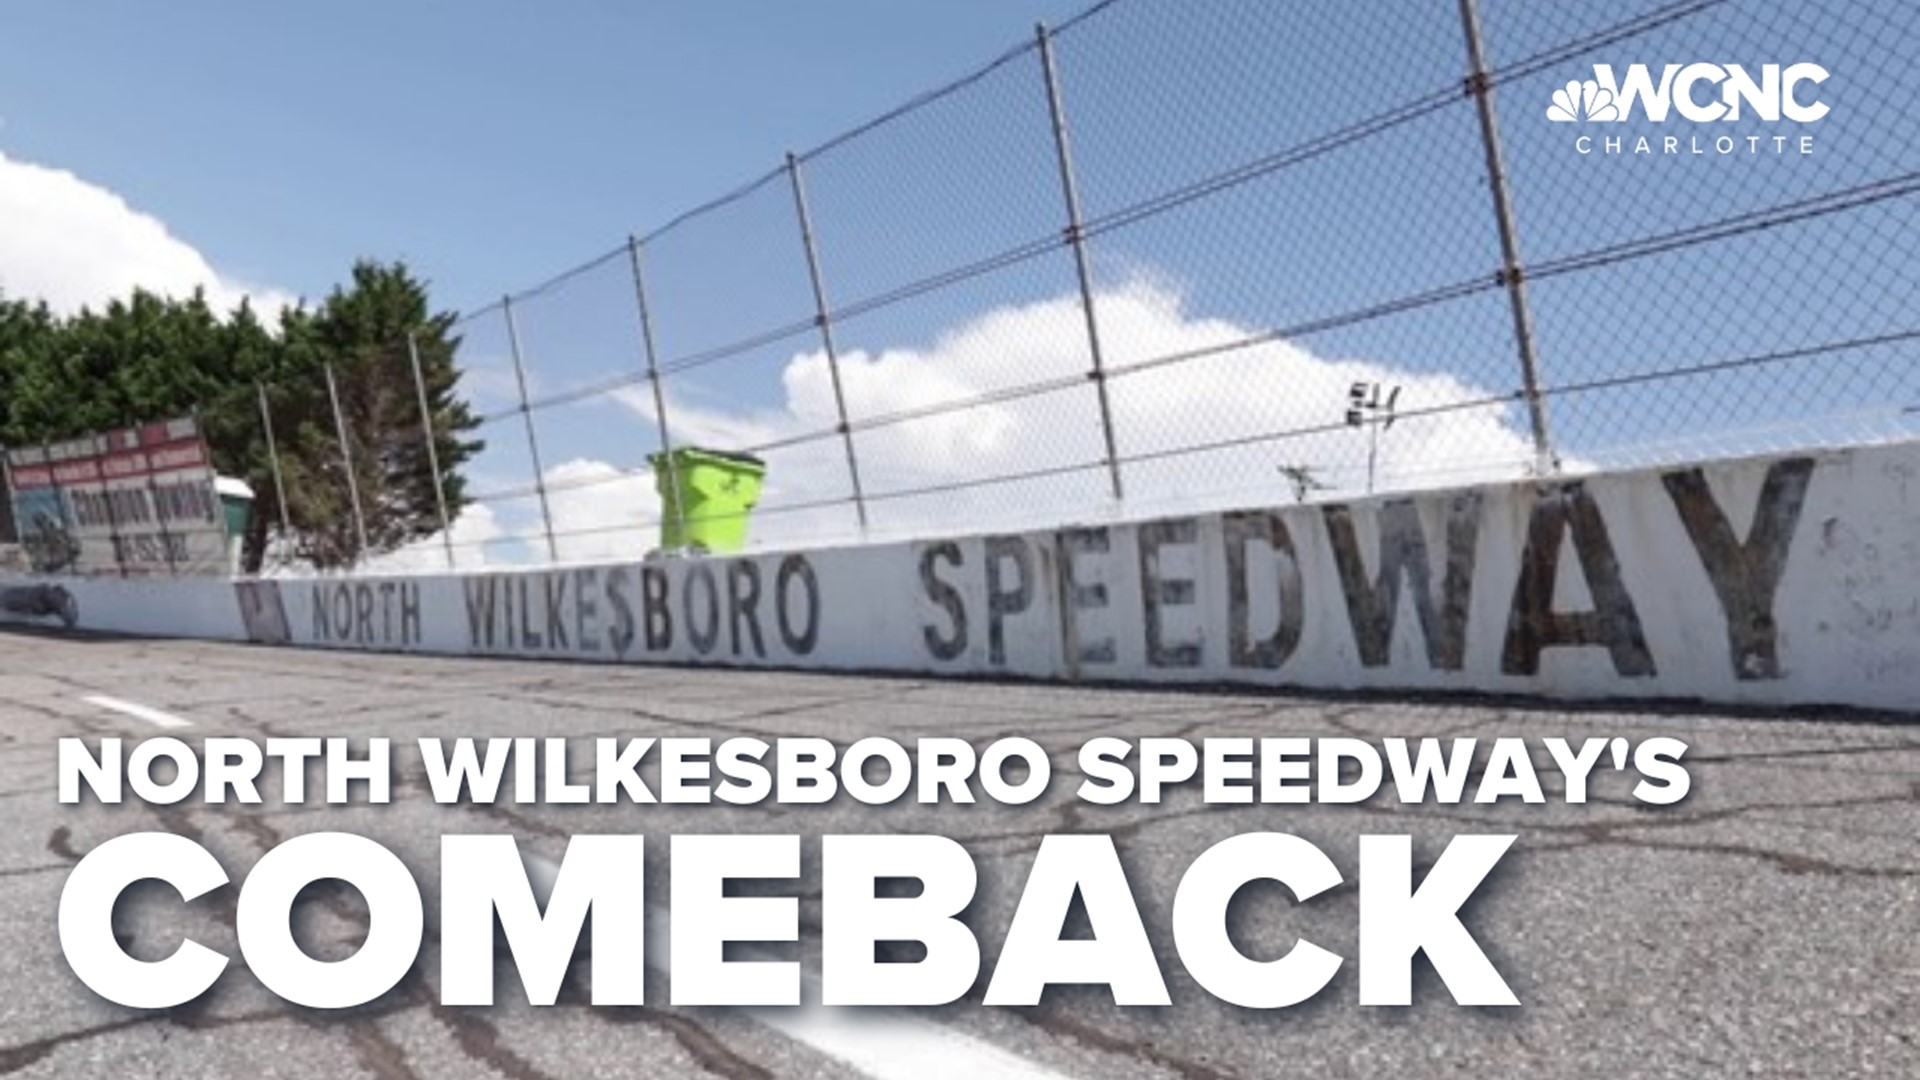 For the first time in nearly 30 years, NASCAR will compete at North Wilkesboro in Sunday's All-Star Race. For many fans, it's a day they'd only dreamed of happening.